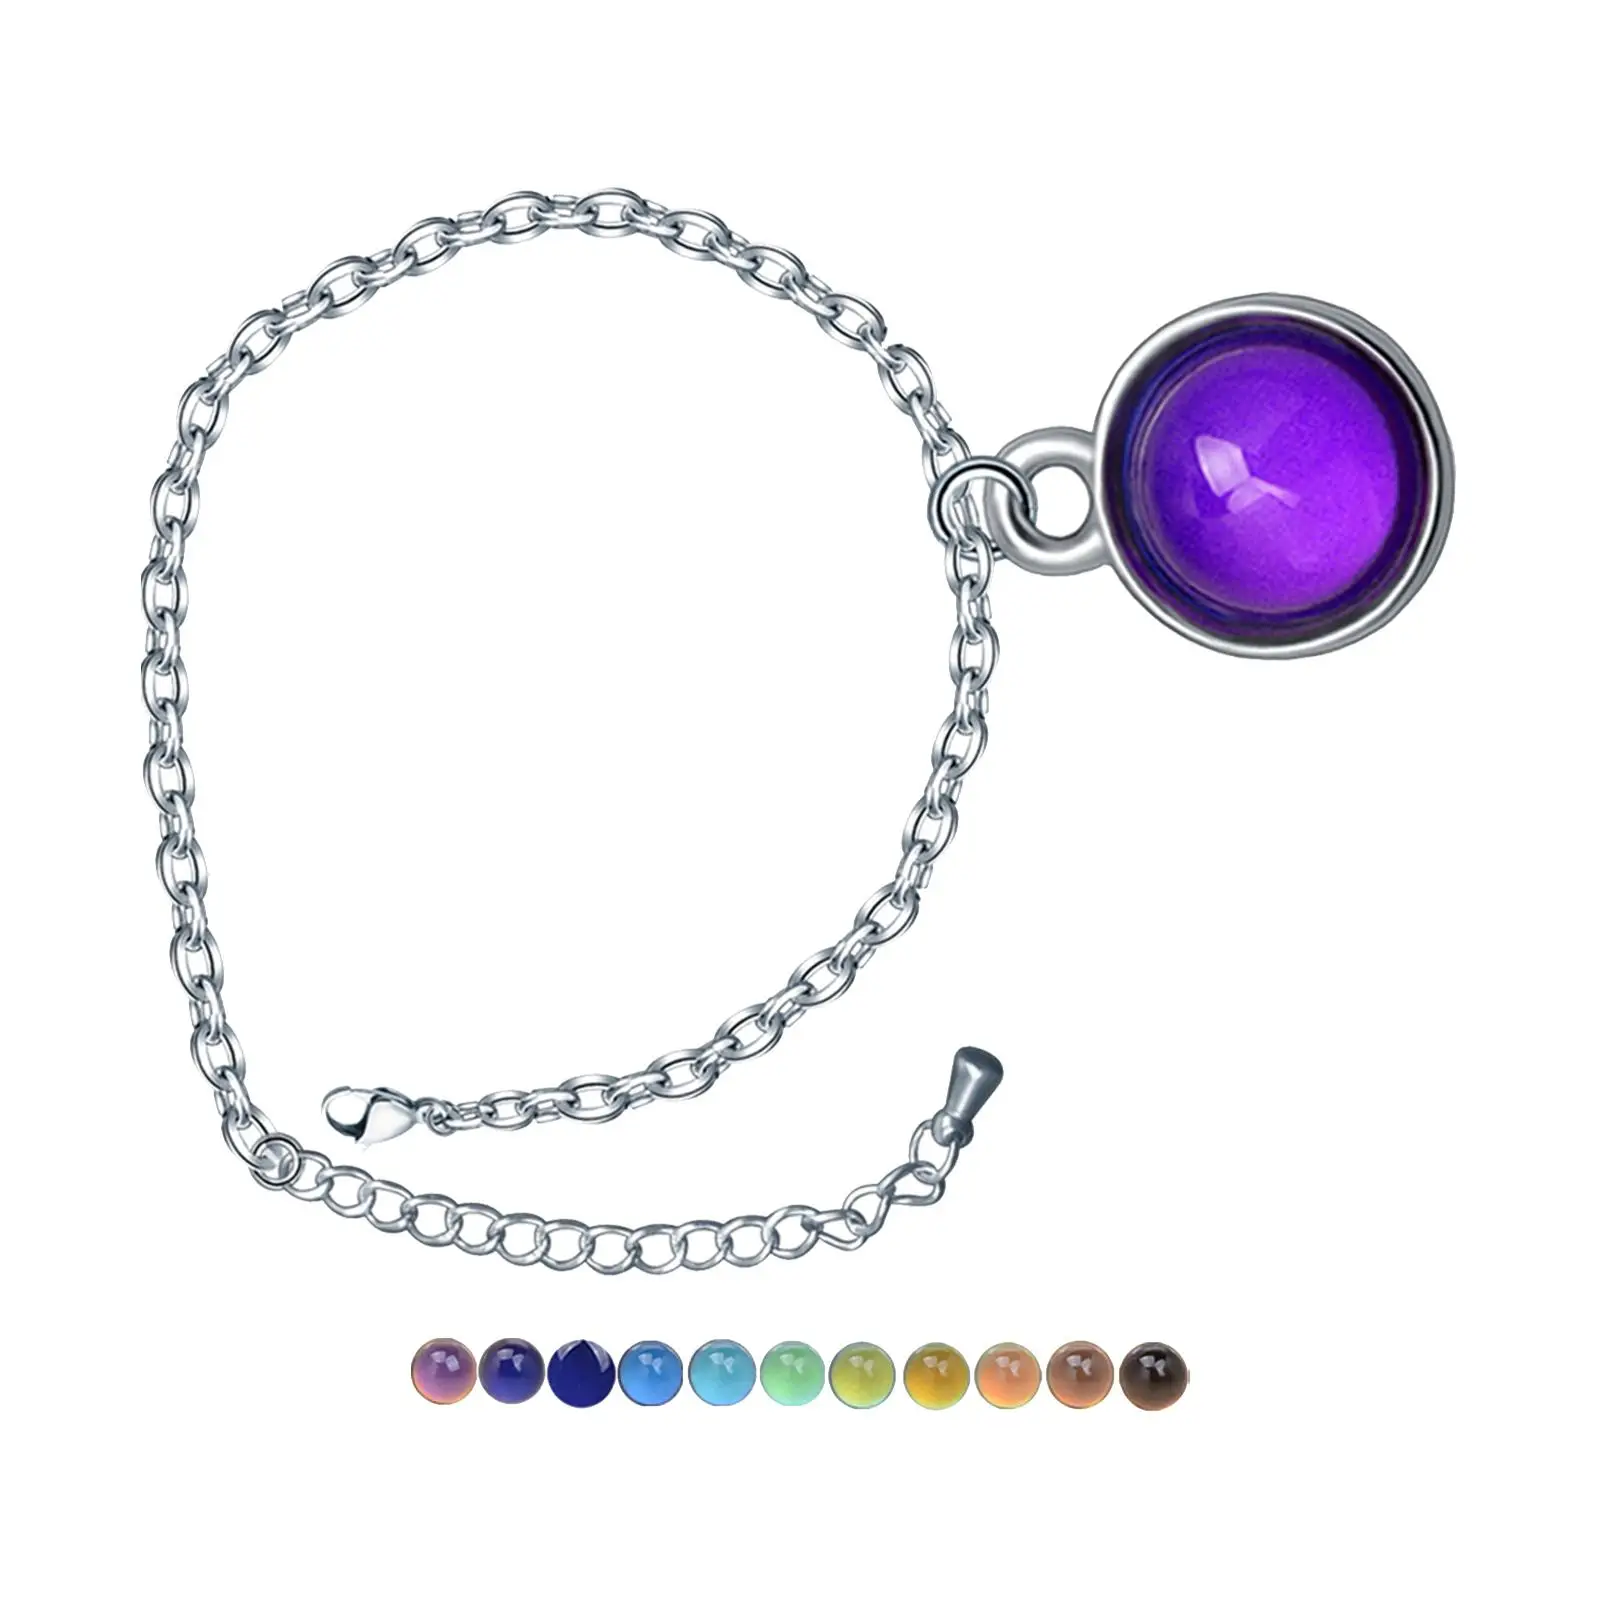 Temperature Sensitive Color Changing Bracelet Fashion Handmade with Pendant for Birthday Valentine Thanksgiving Gift Women Men